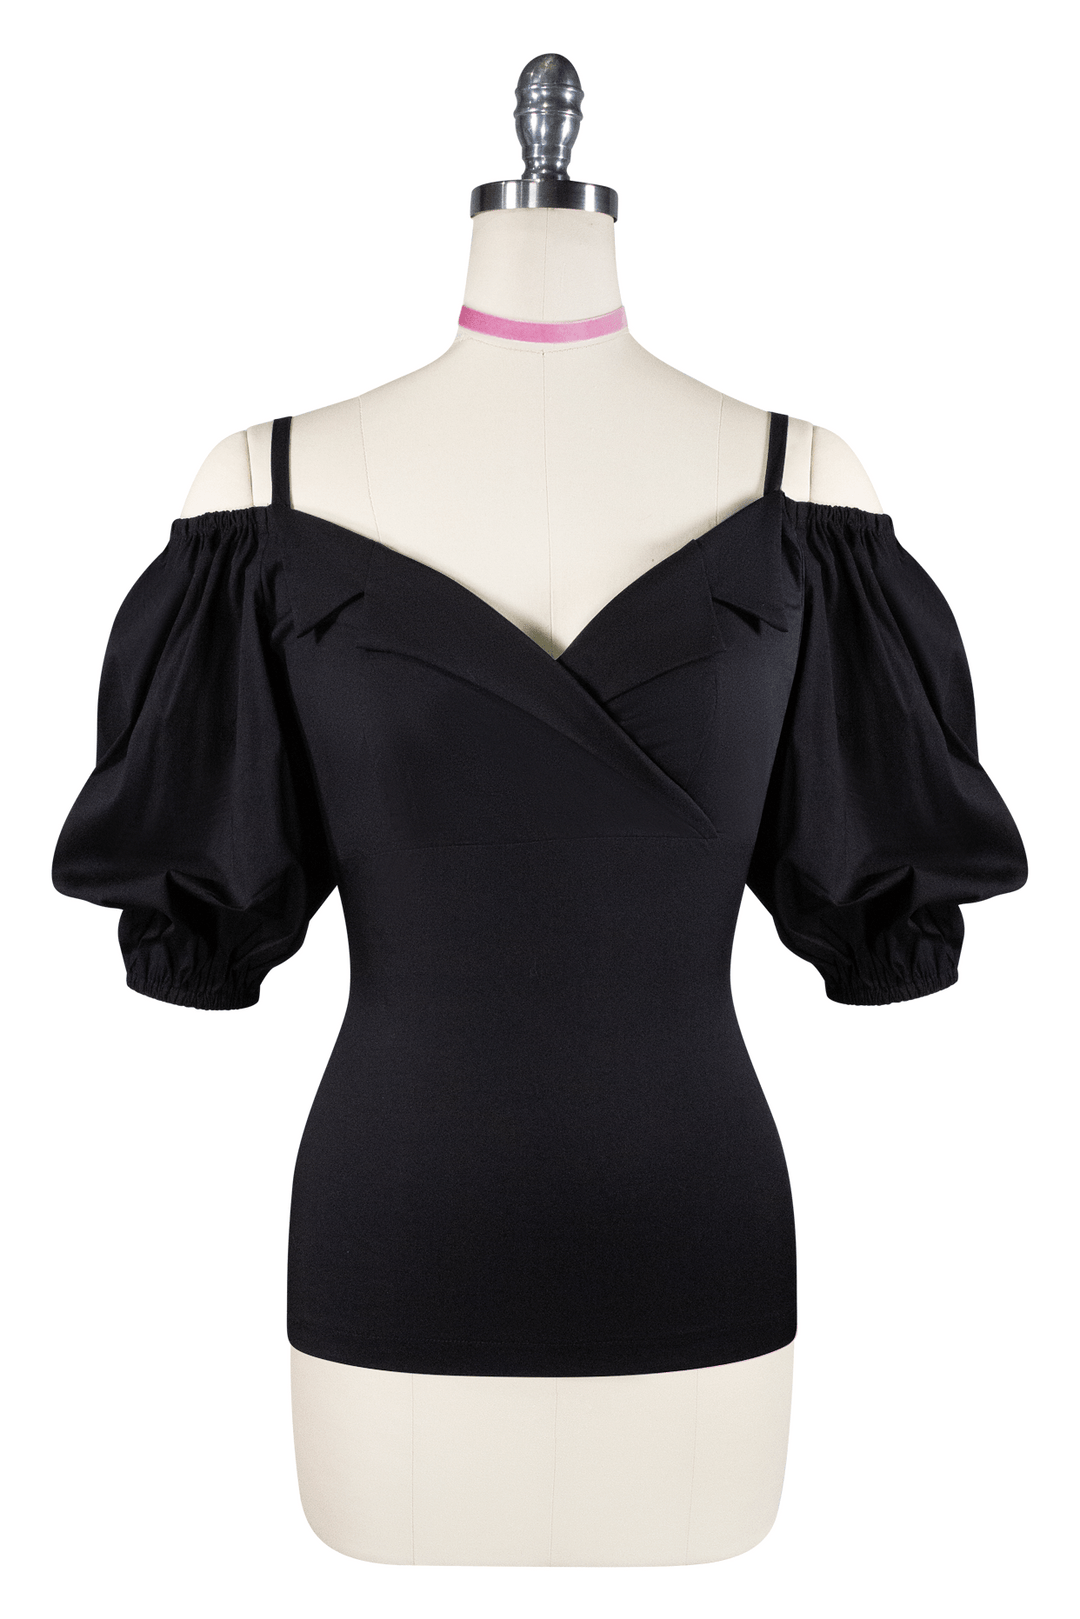 French Vacation Classic Top (Black) - Kitten D'Amour